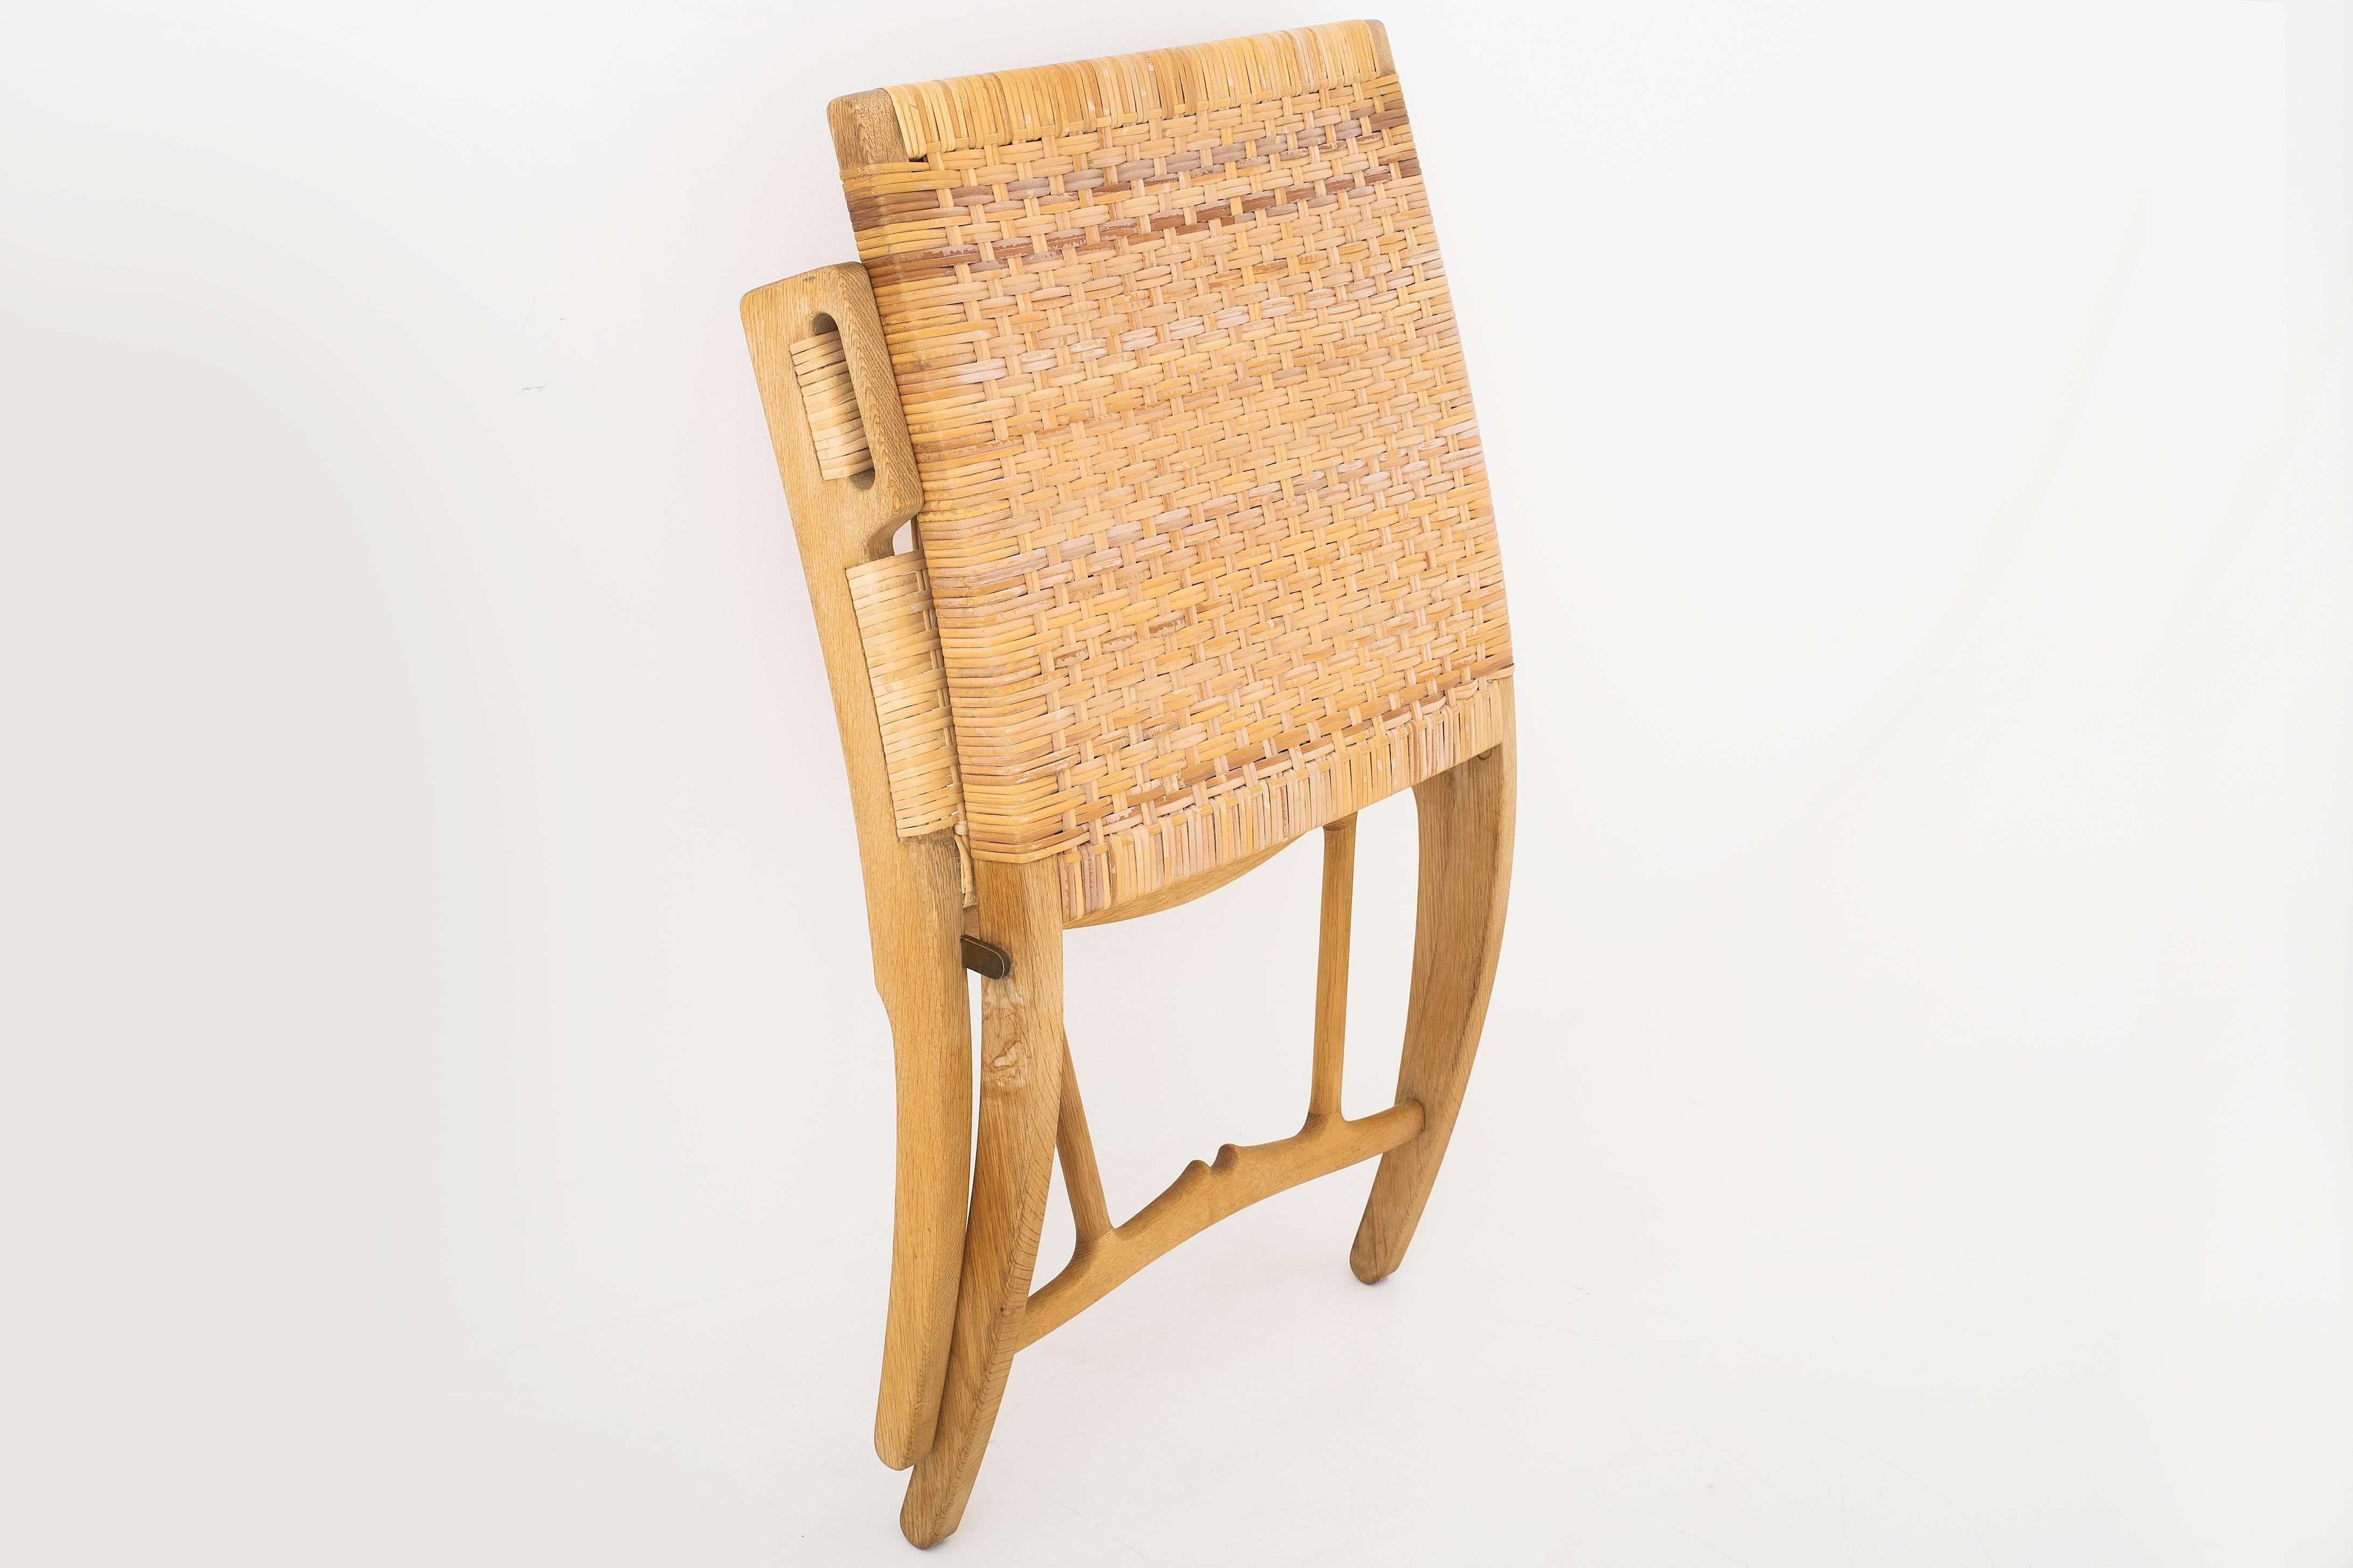 Original folding chair with frame in patinated oak. Seat and back in woven cane. Model JH 512. Designed in 1949. Produced by cabinet maker Johannes Hansen.
                          